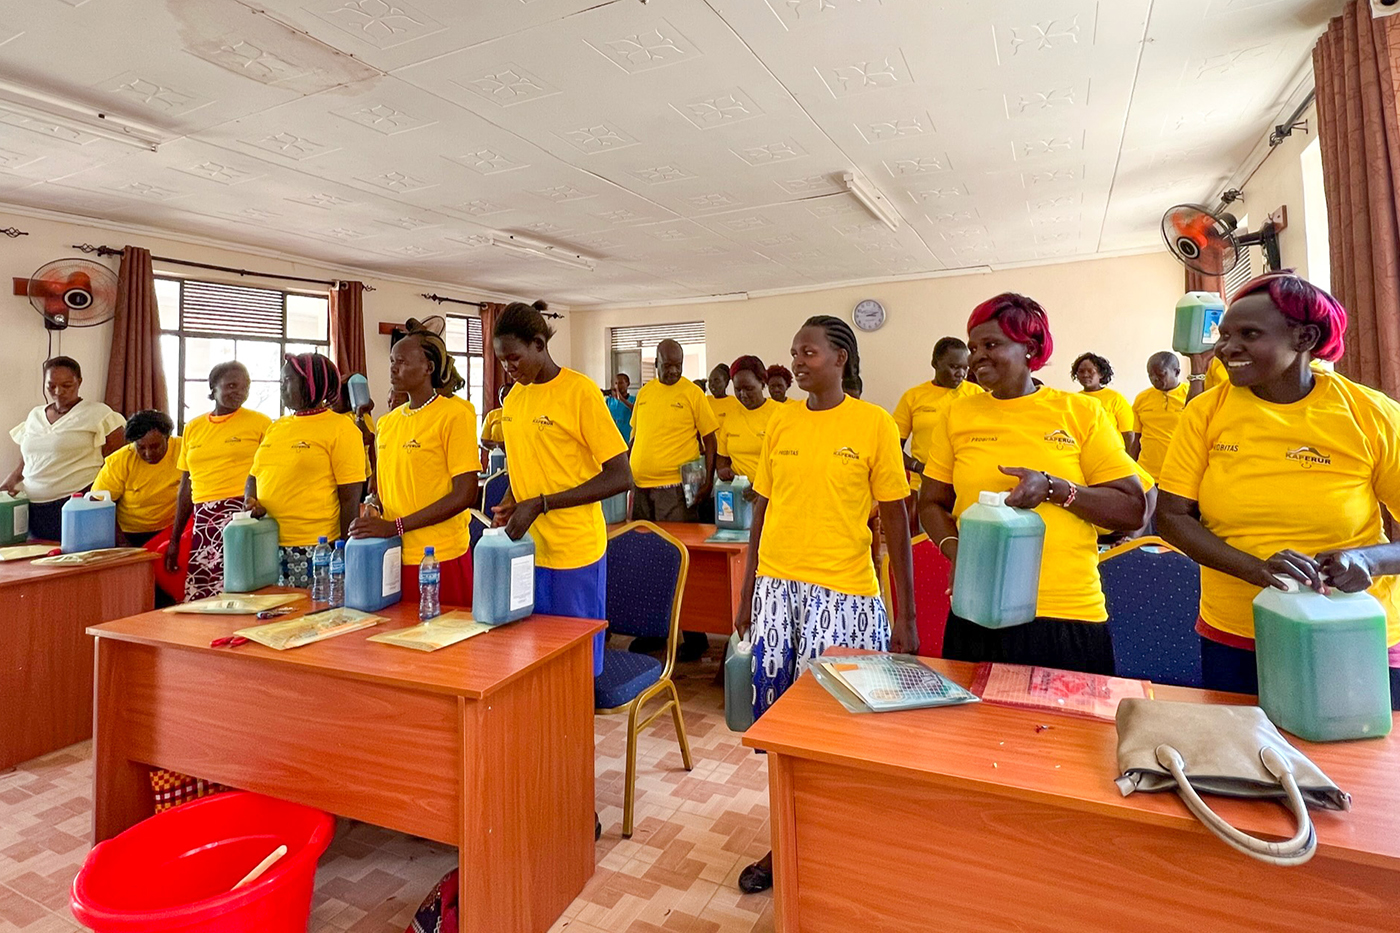 Multiple people wear yellow shirts and stand together in a classroom.